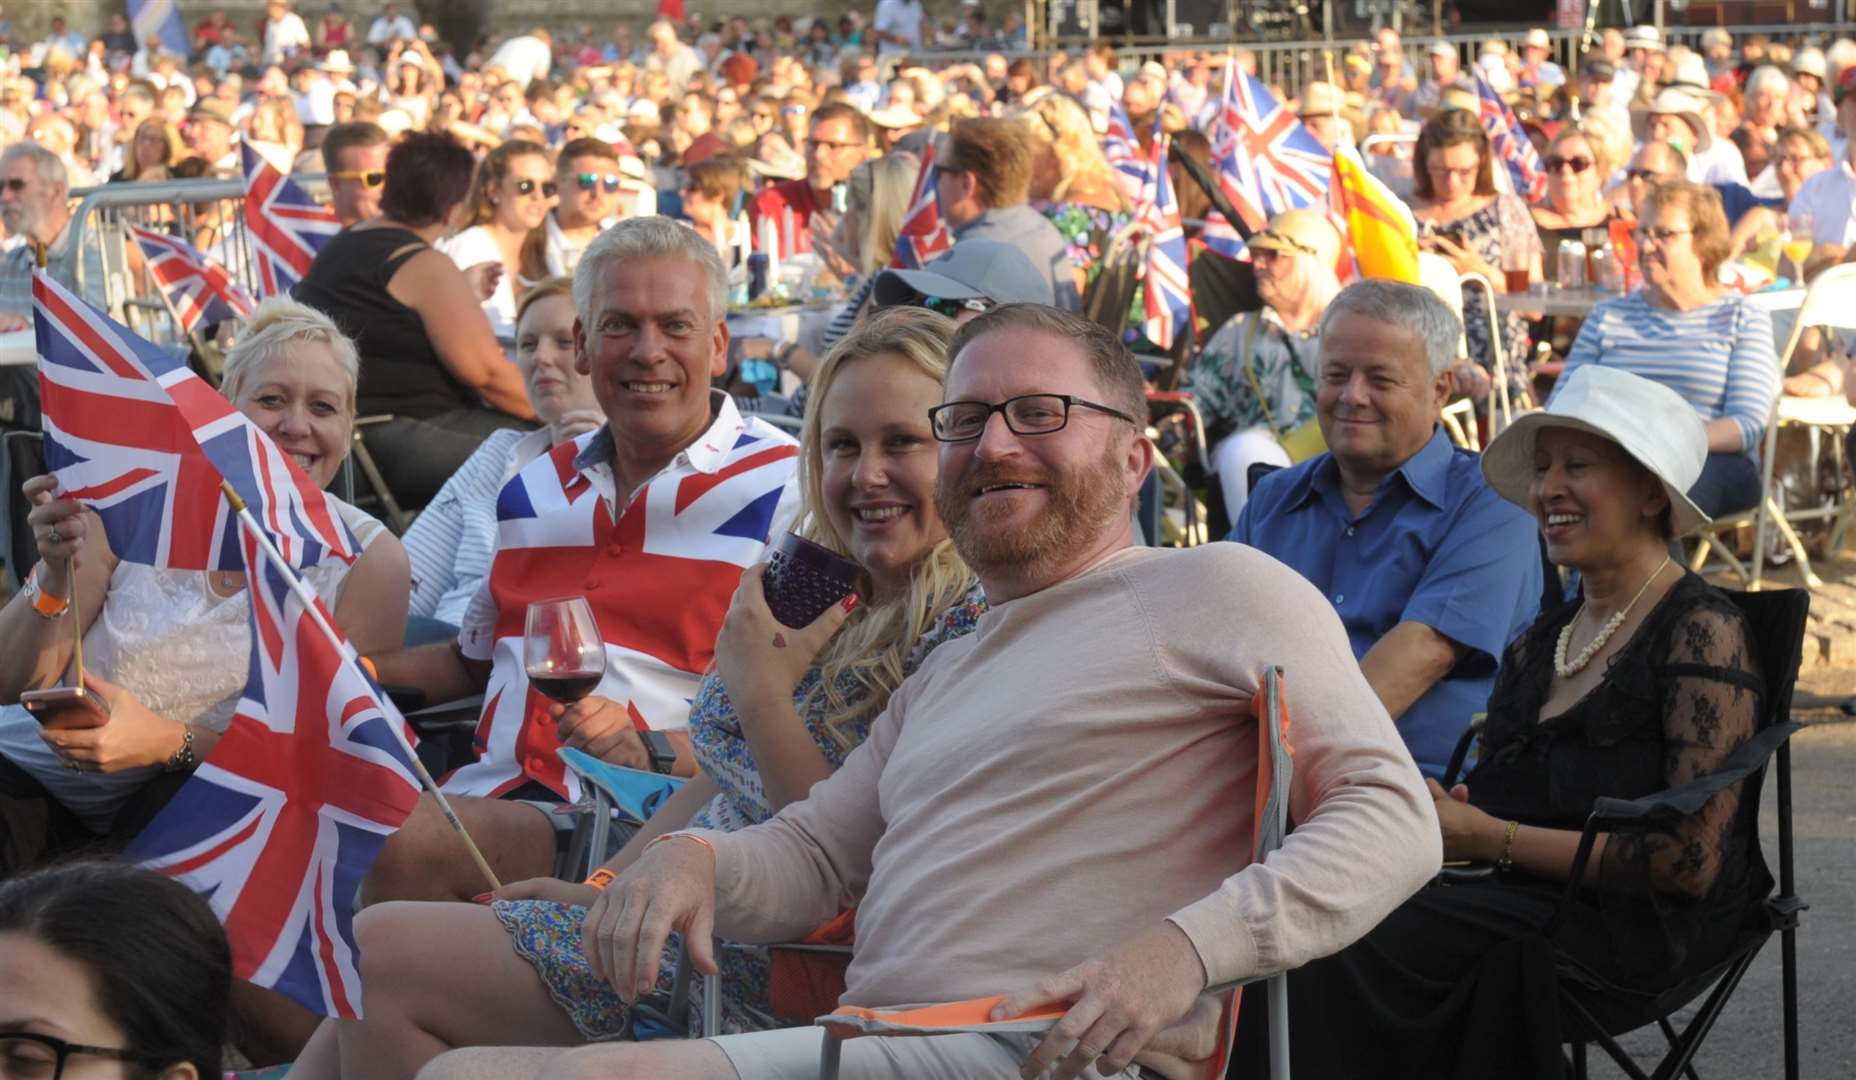 Keith, Emma and friends enjoy last year's Proms Picture: Steve Crispe